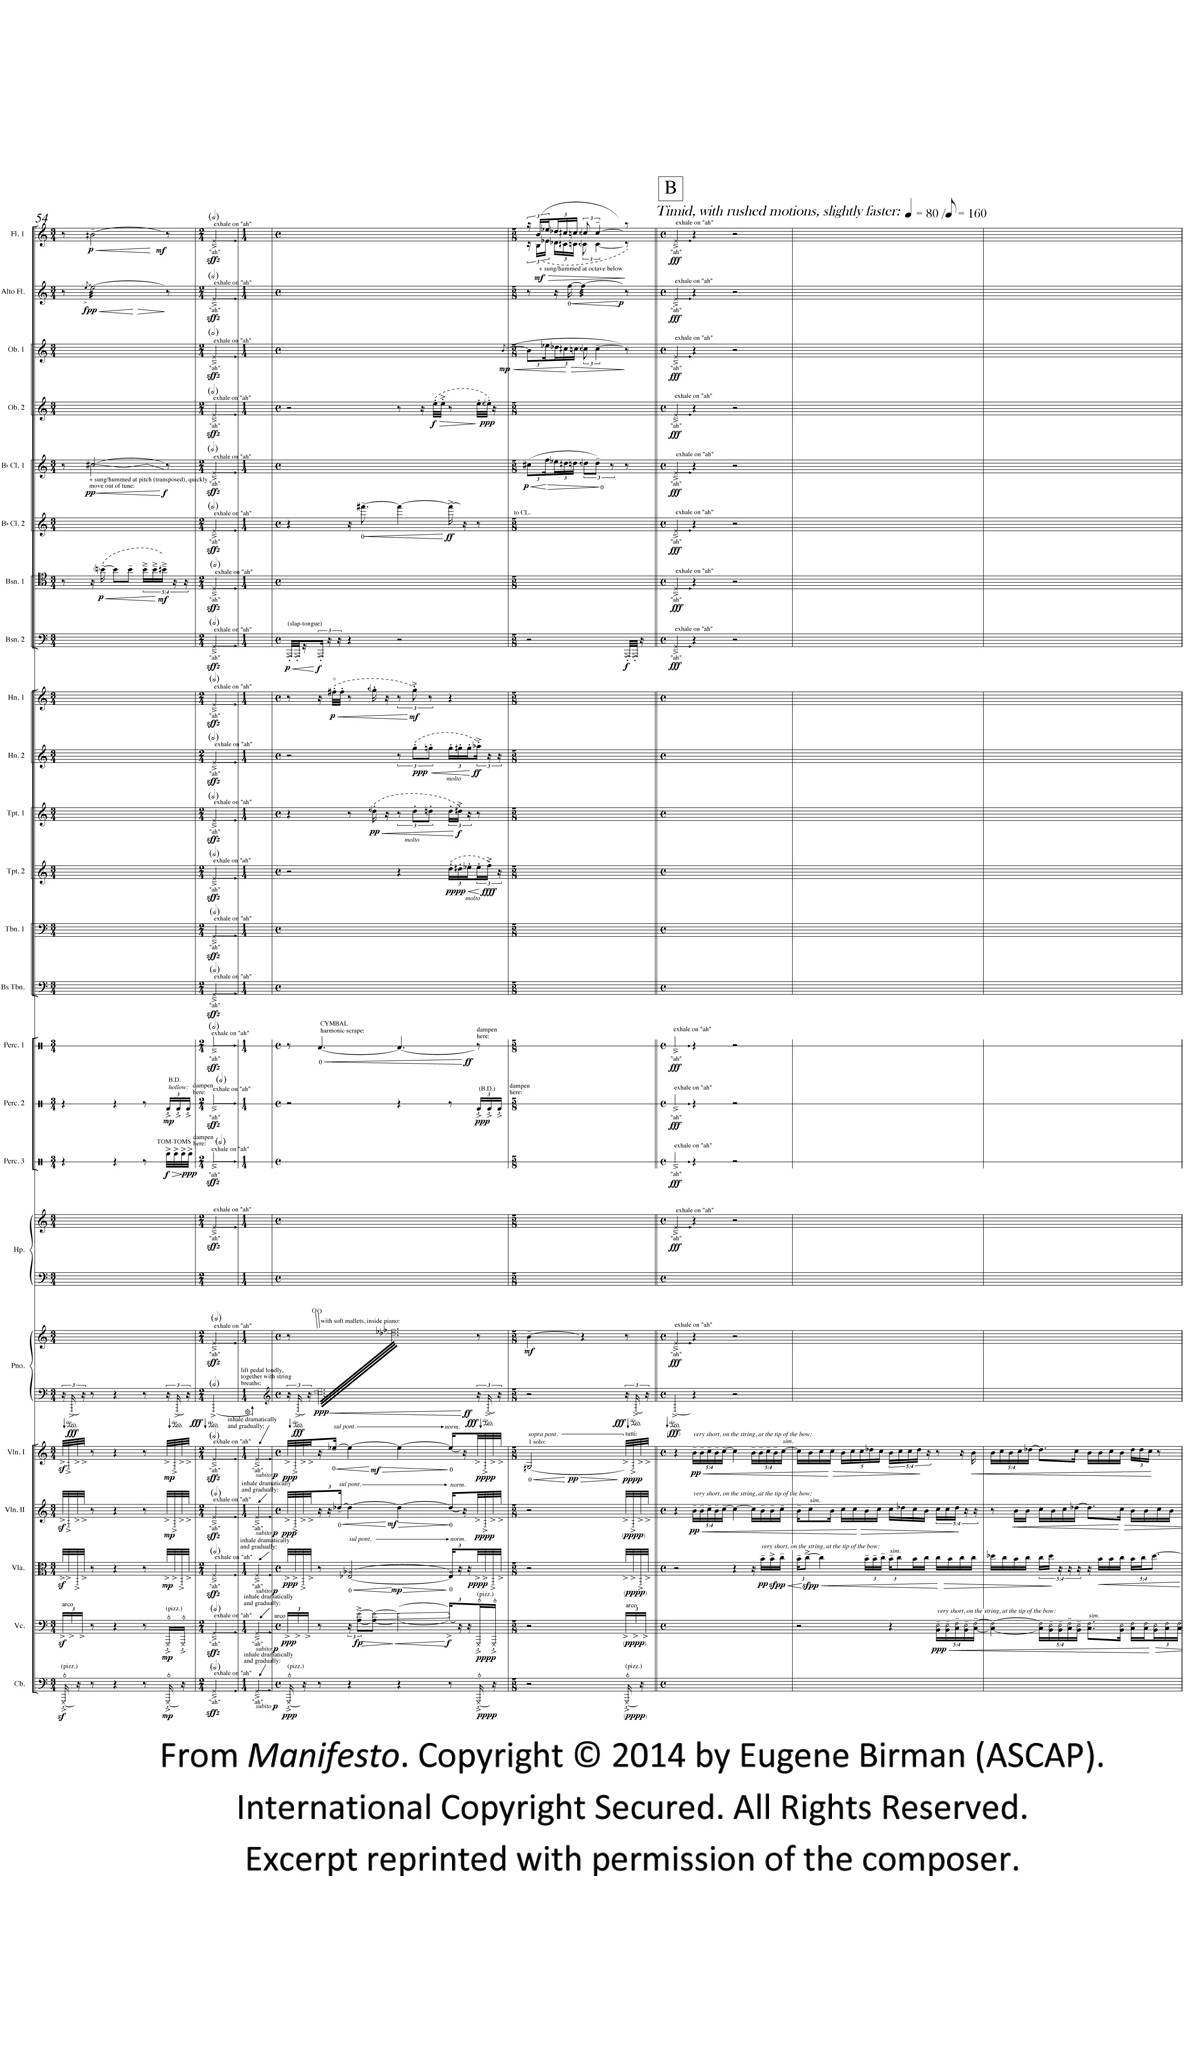 A page from the orchestral score of Eugene Birman's Manifesto